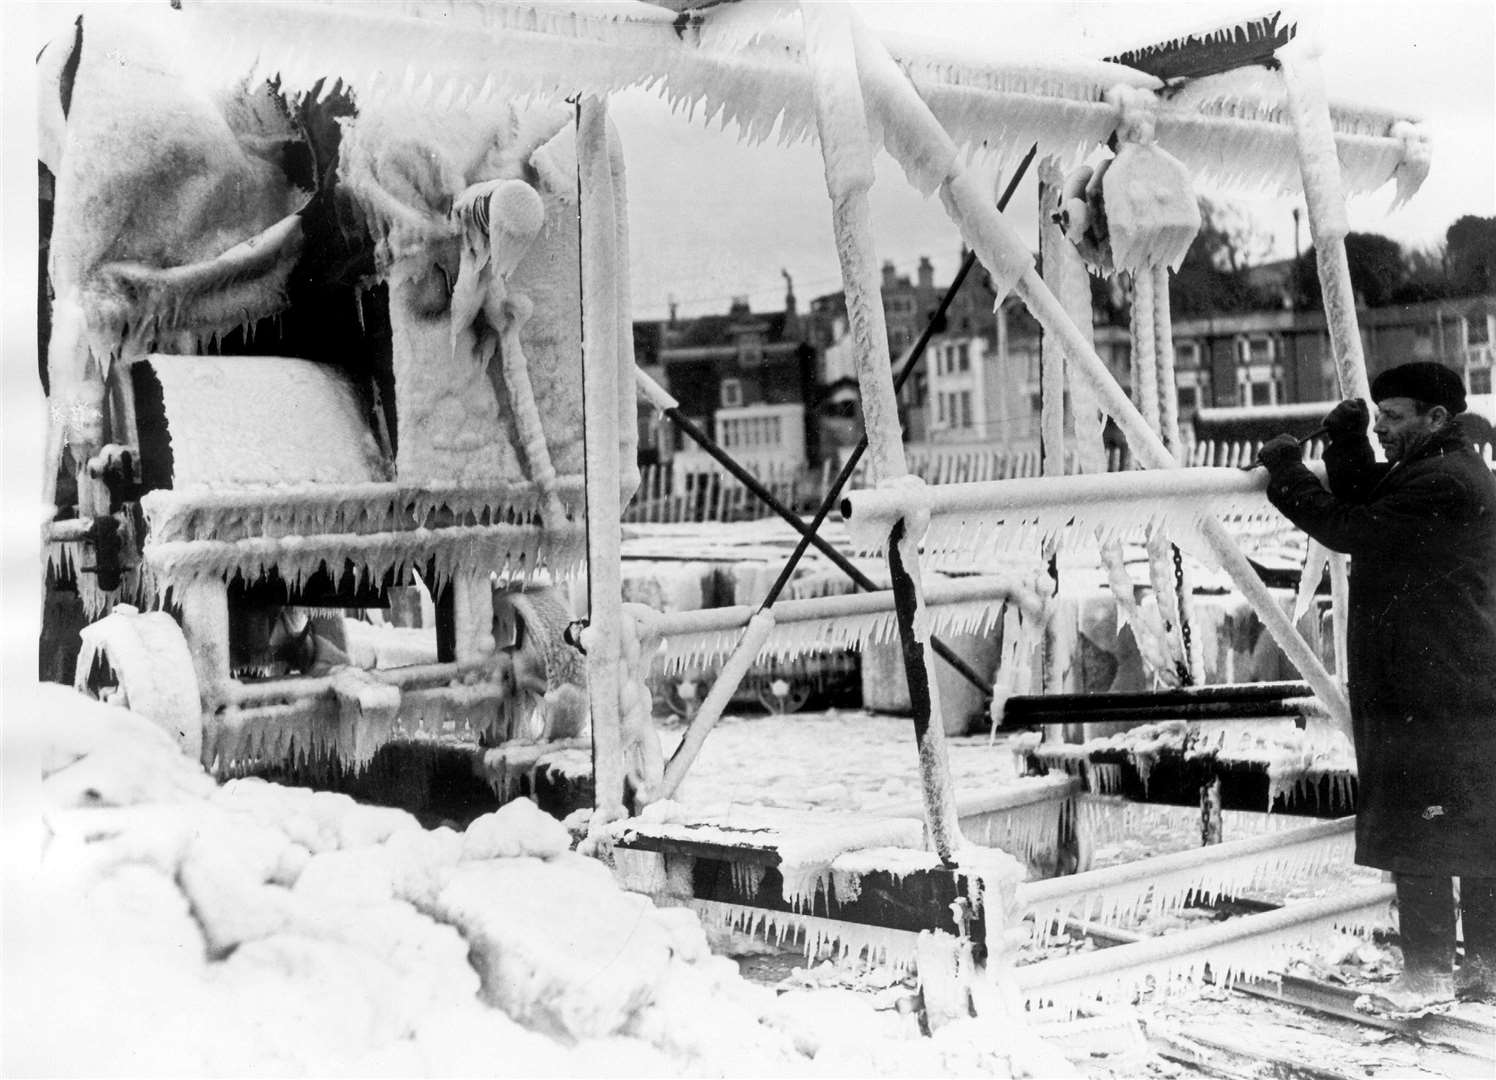 Broadstairs after heavy snow falls across the county in February 1954